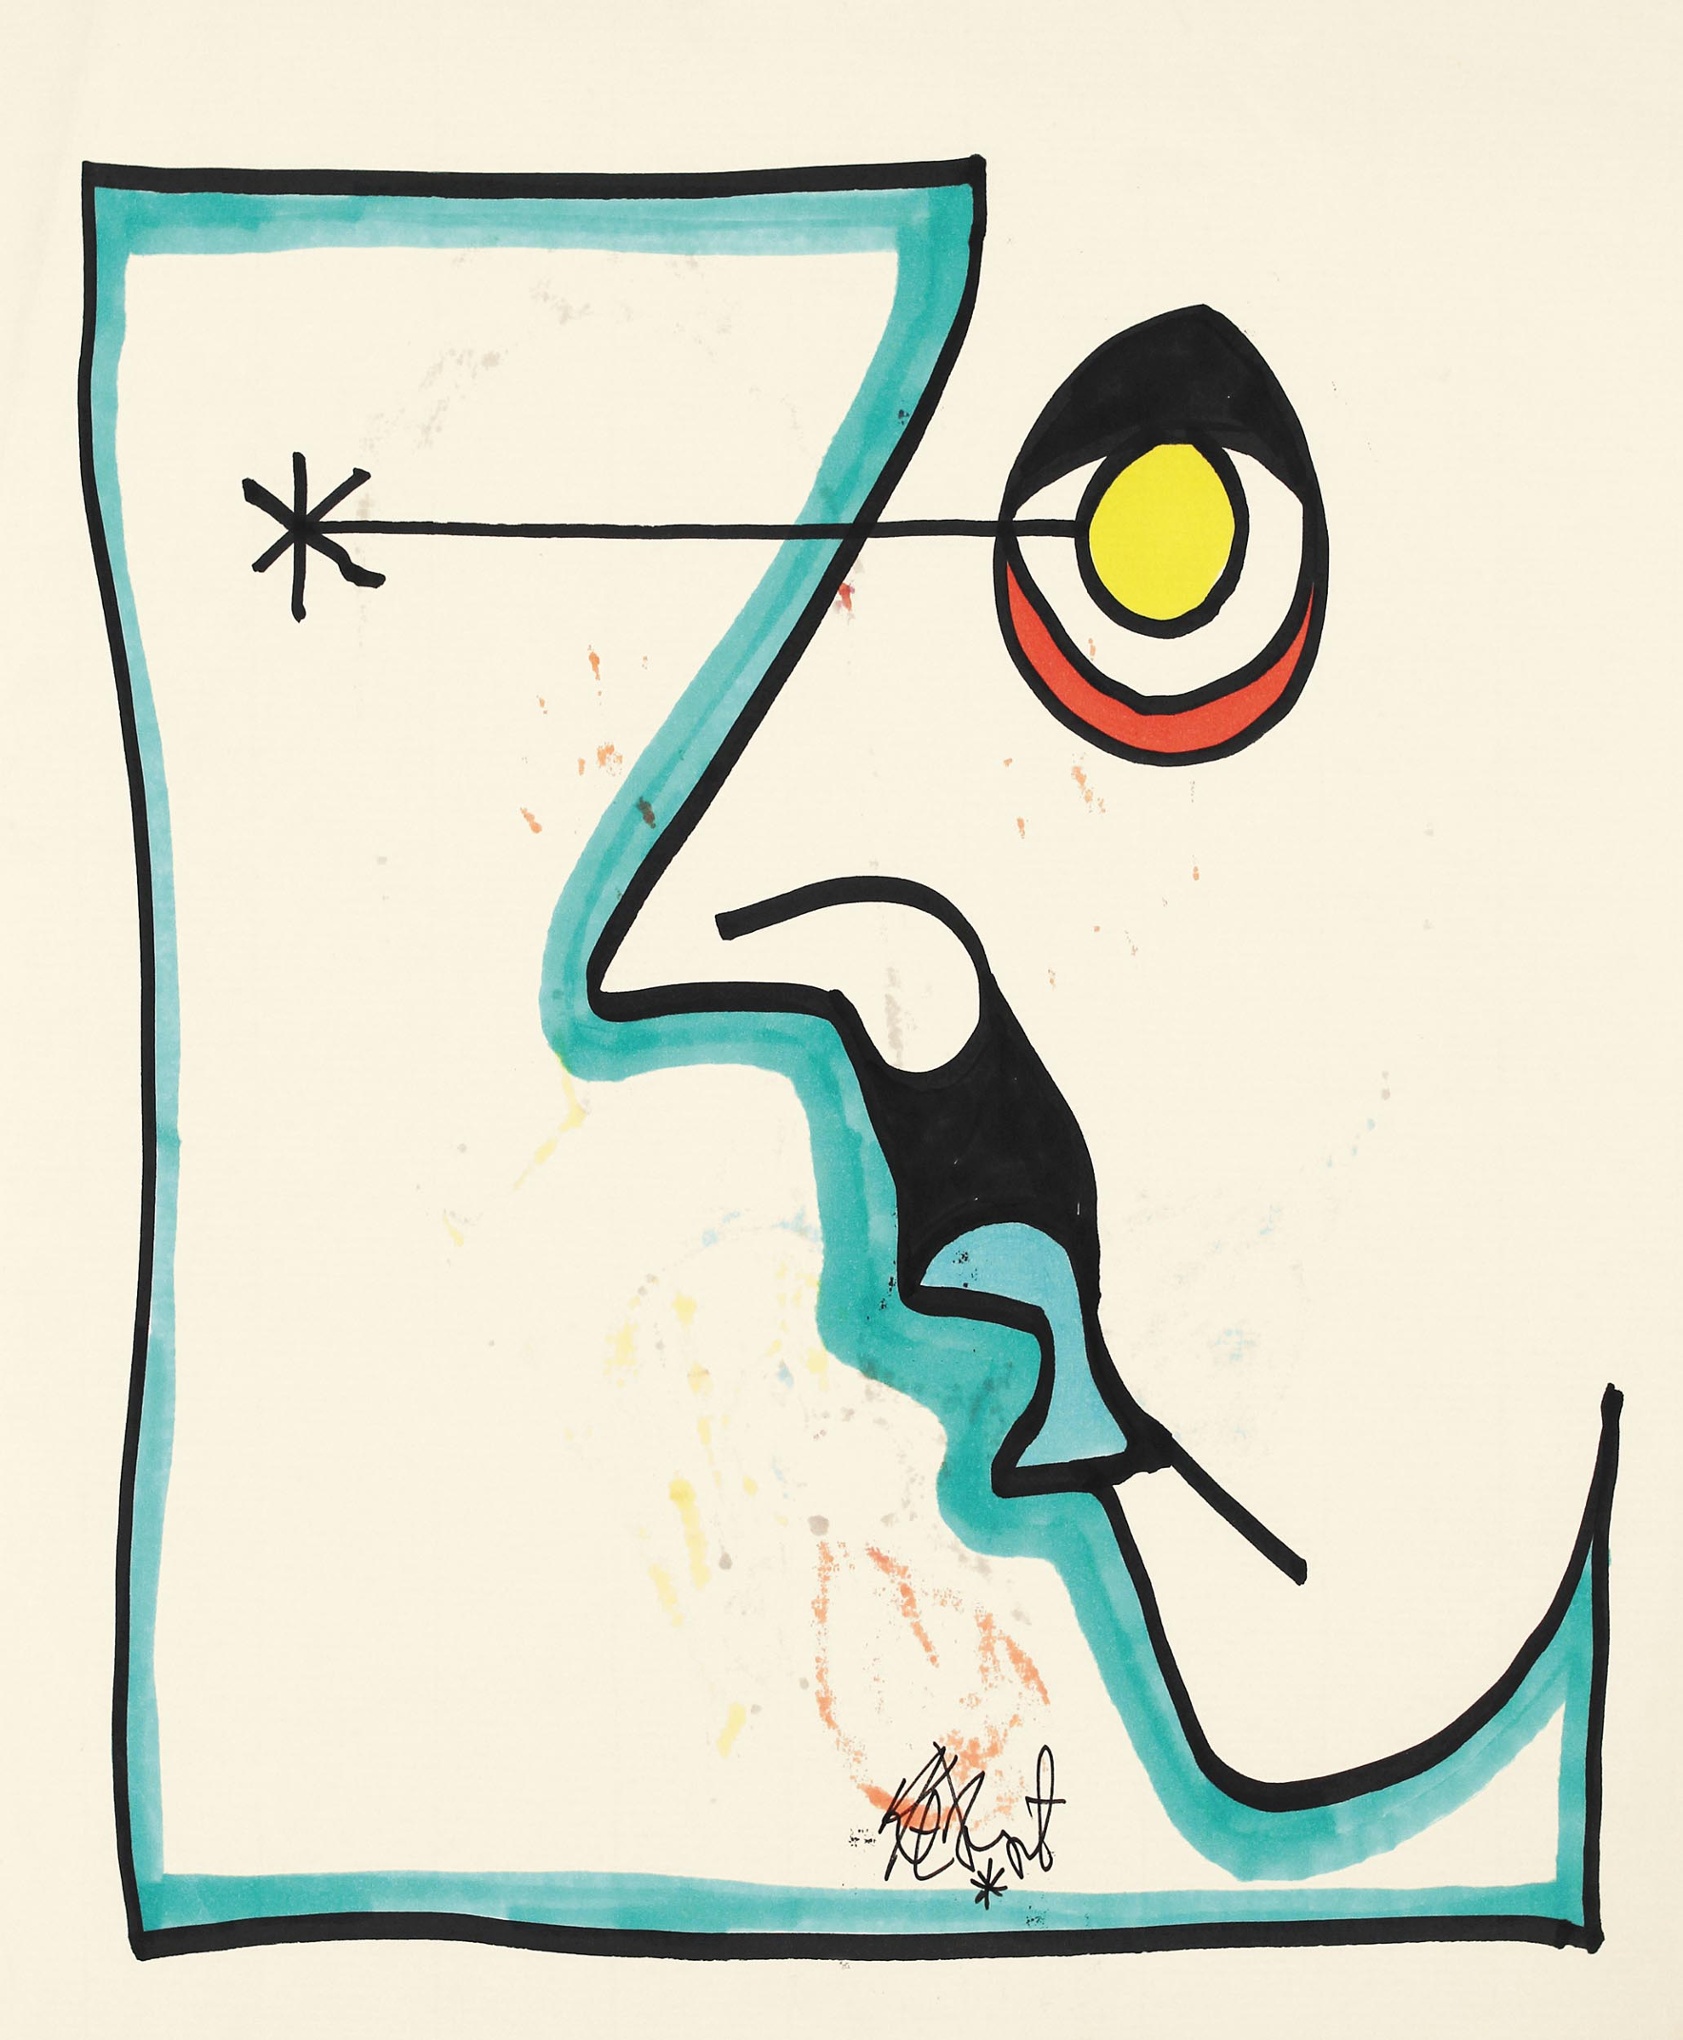 Kurt Vonnegut the drawings of science fiction's master artist in